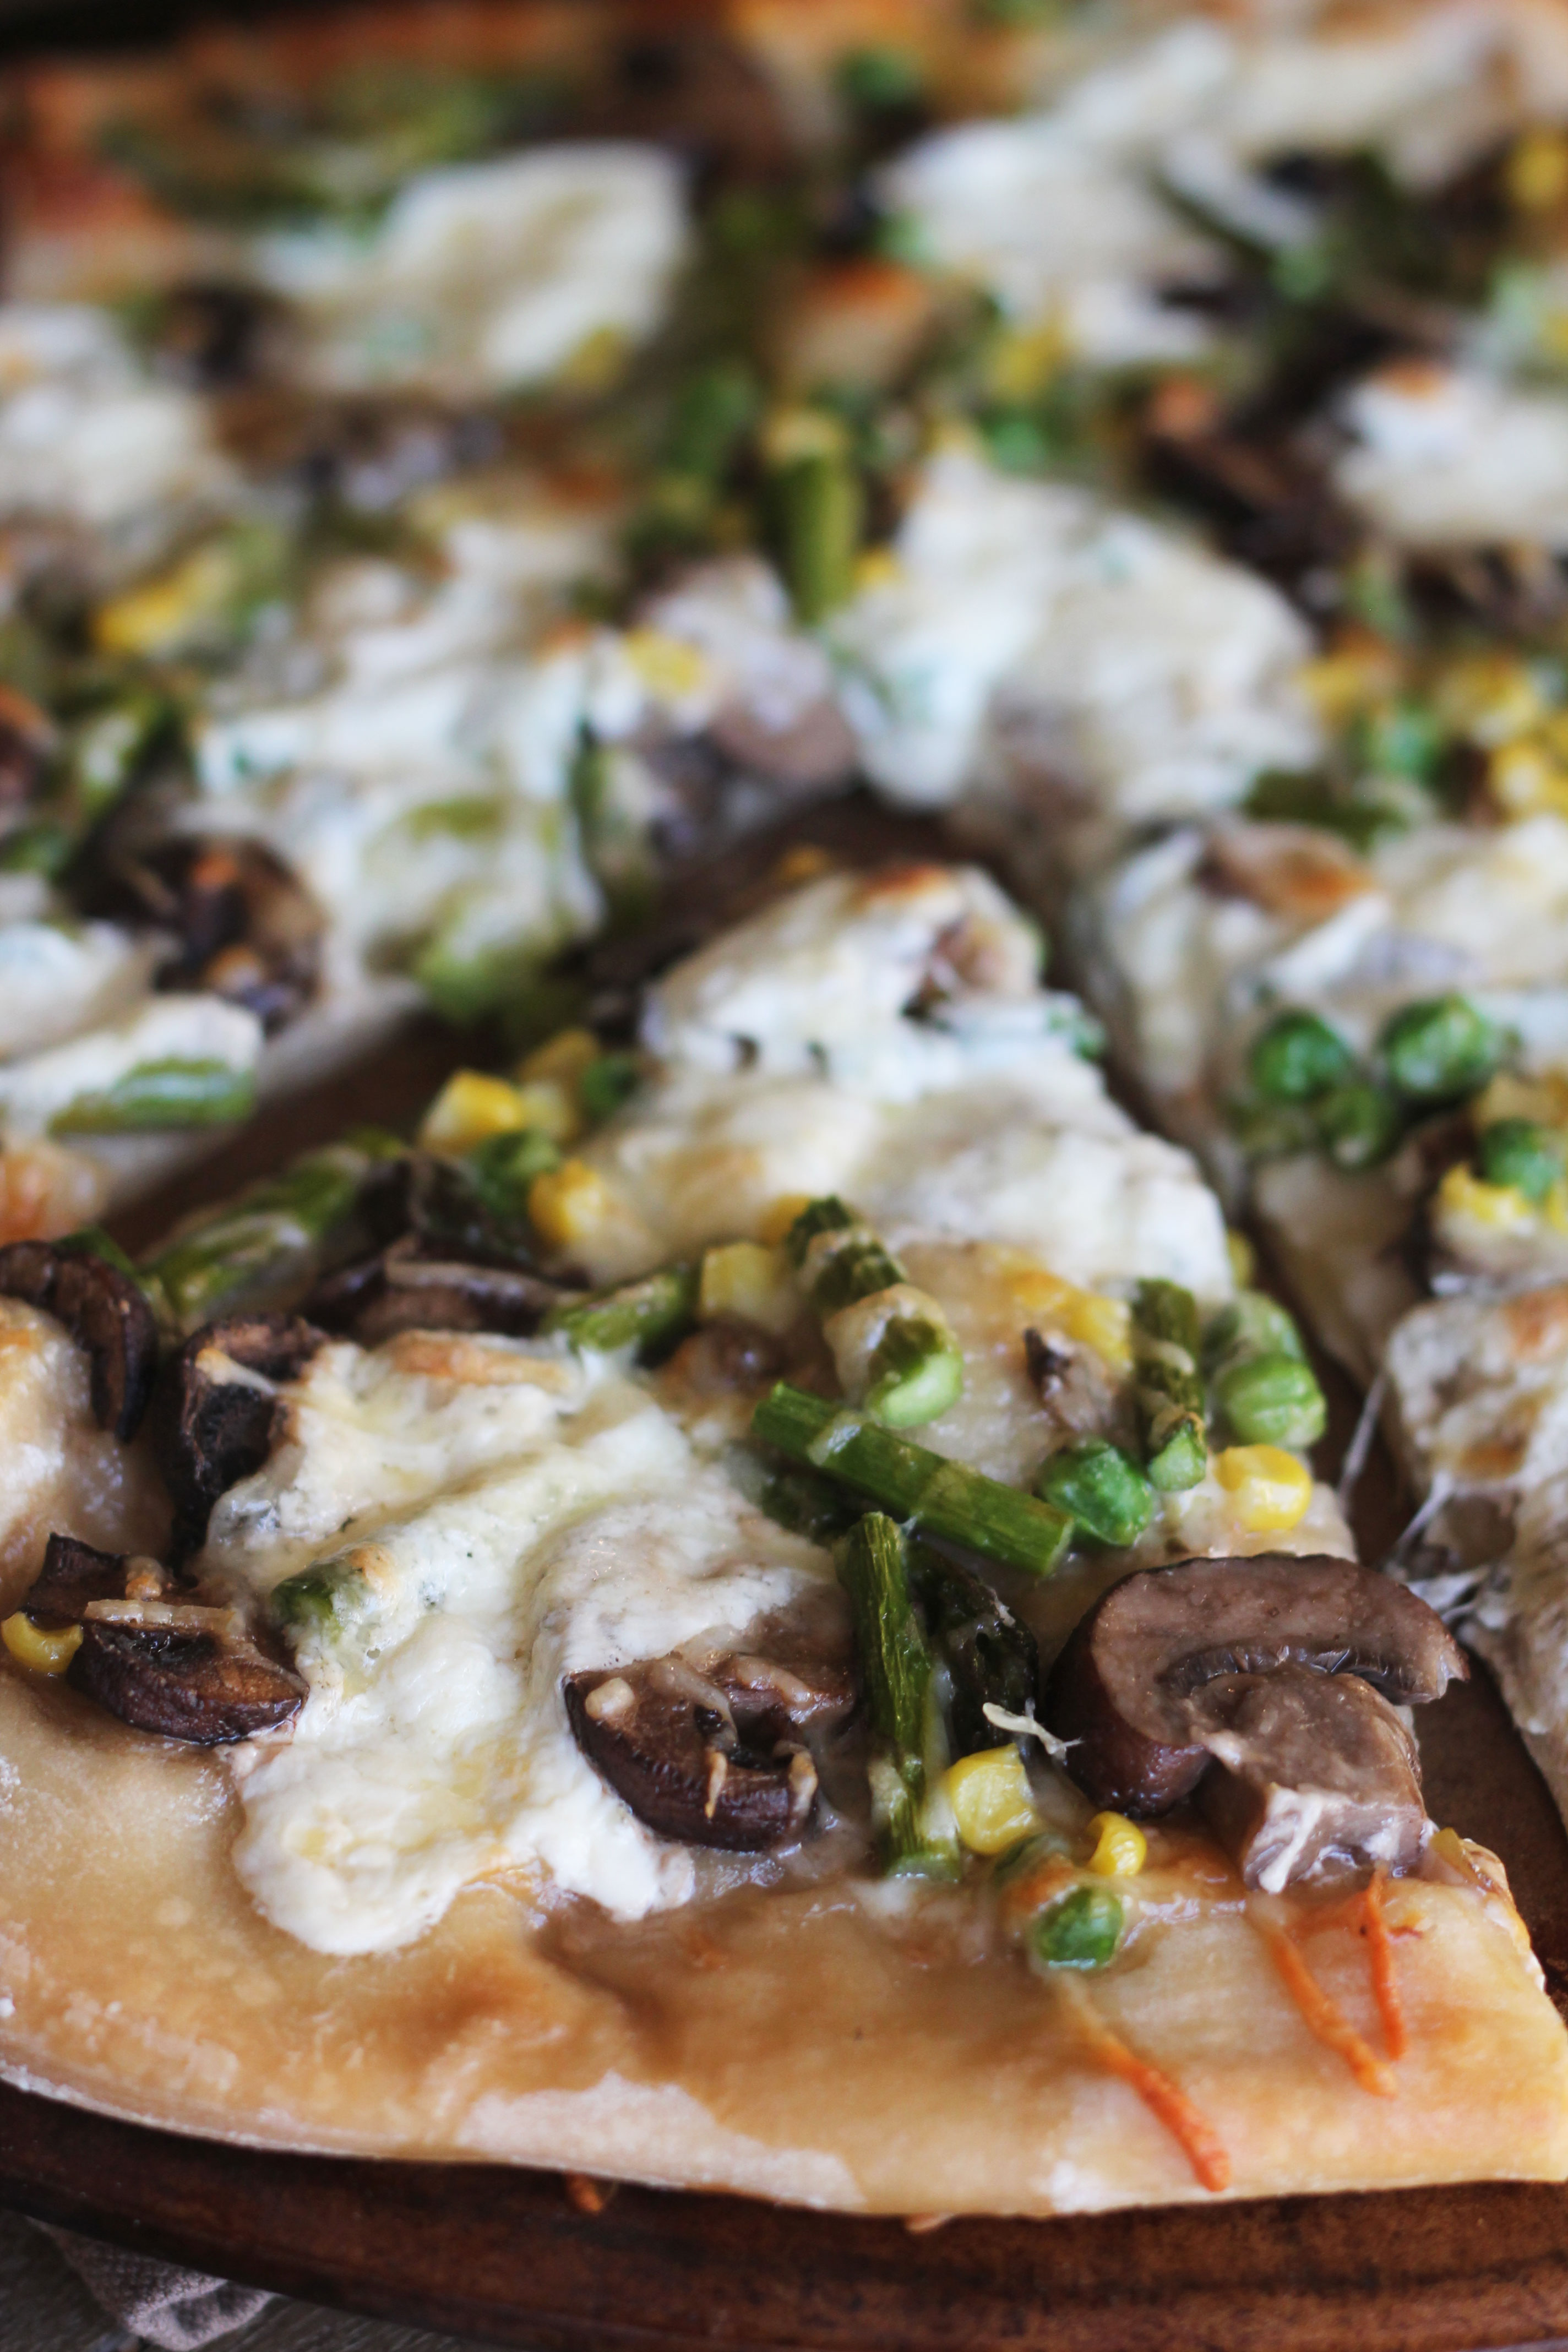 This pizza is packed full of your favorite spring vegetables